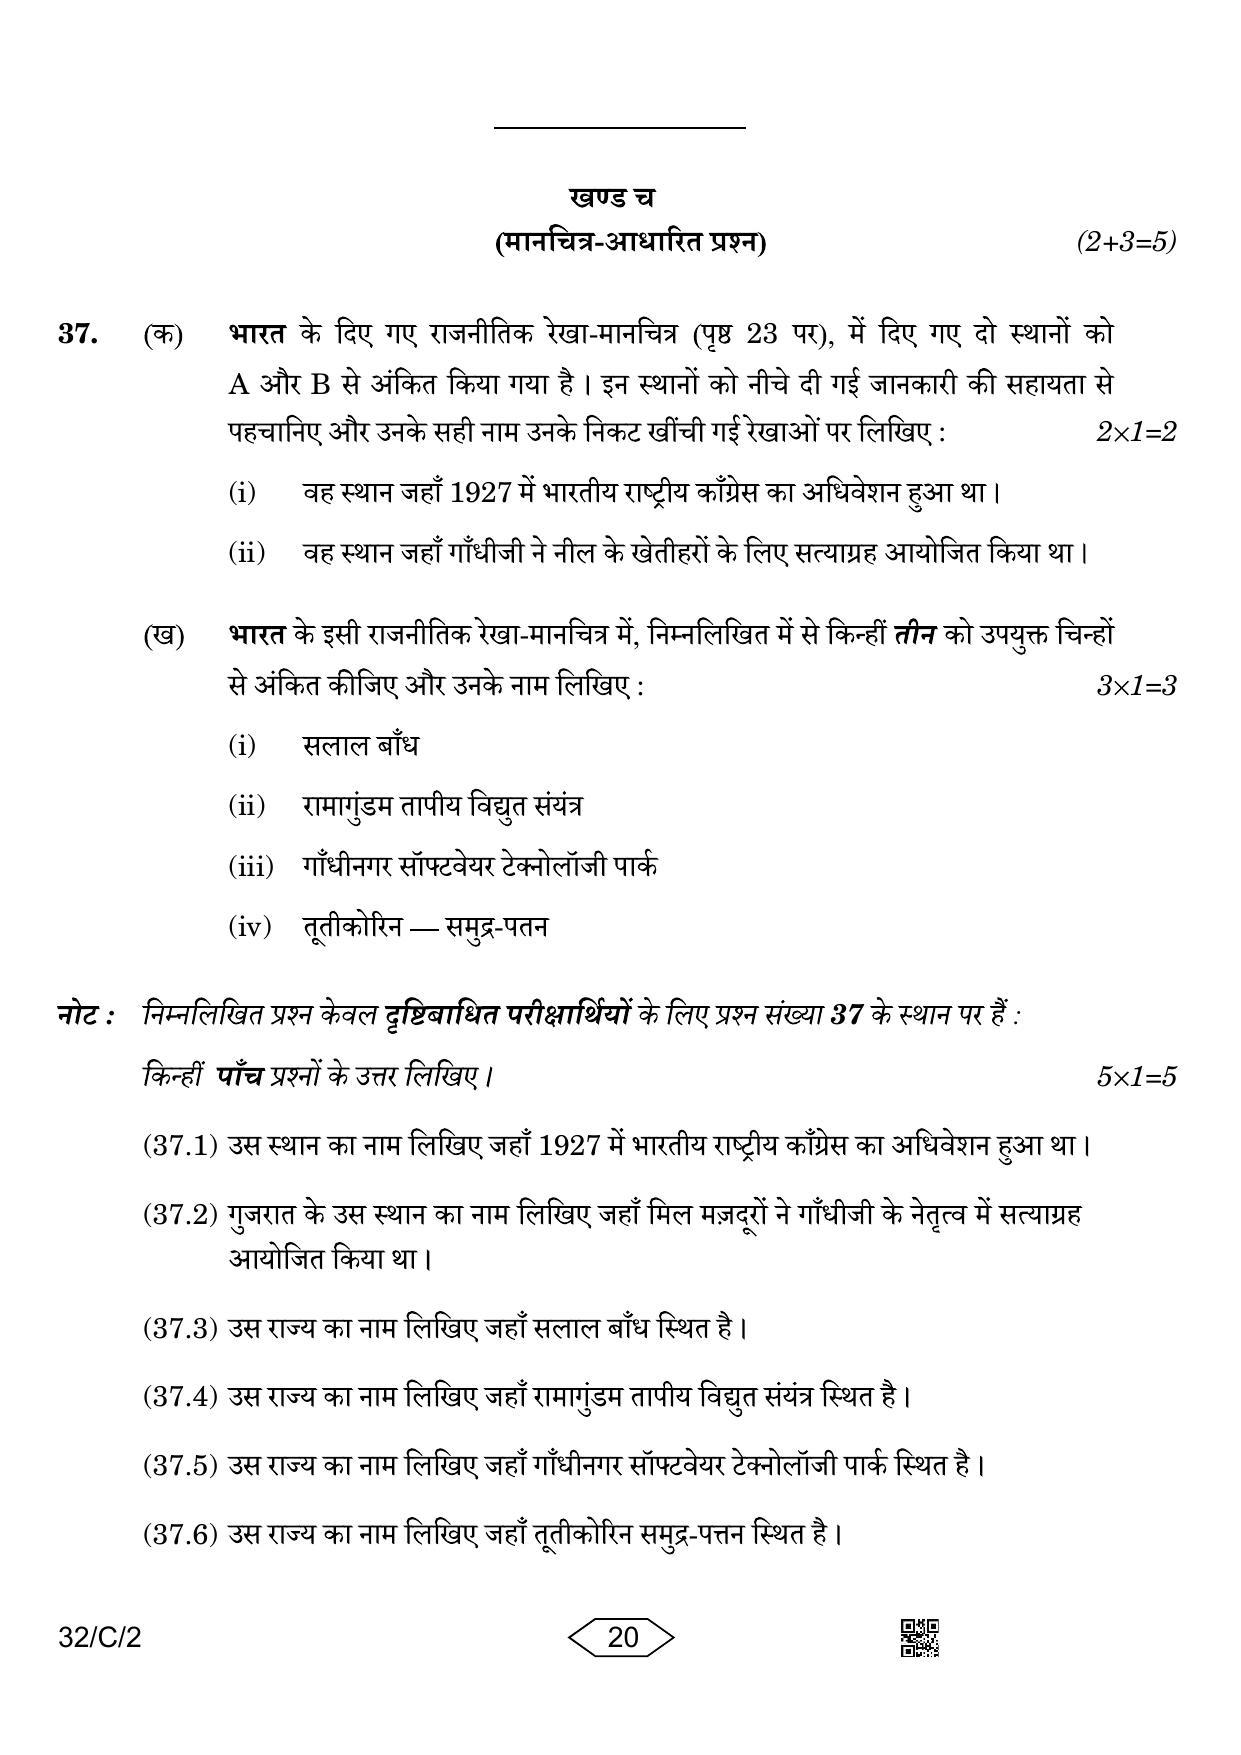 CBSE Class 10 32-2 Social Science 2023 (Compartment) Question Paper - Page 20